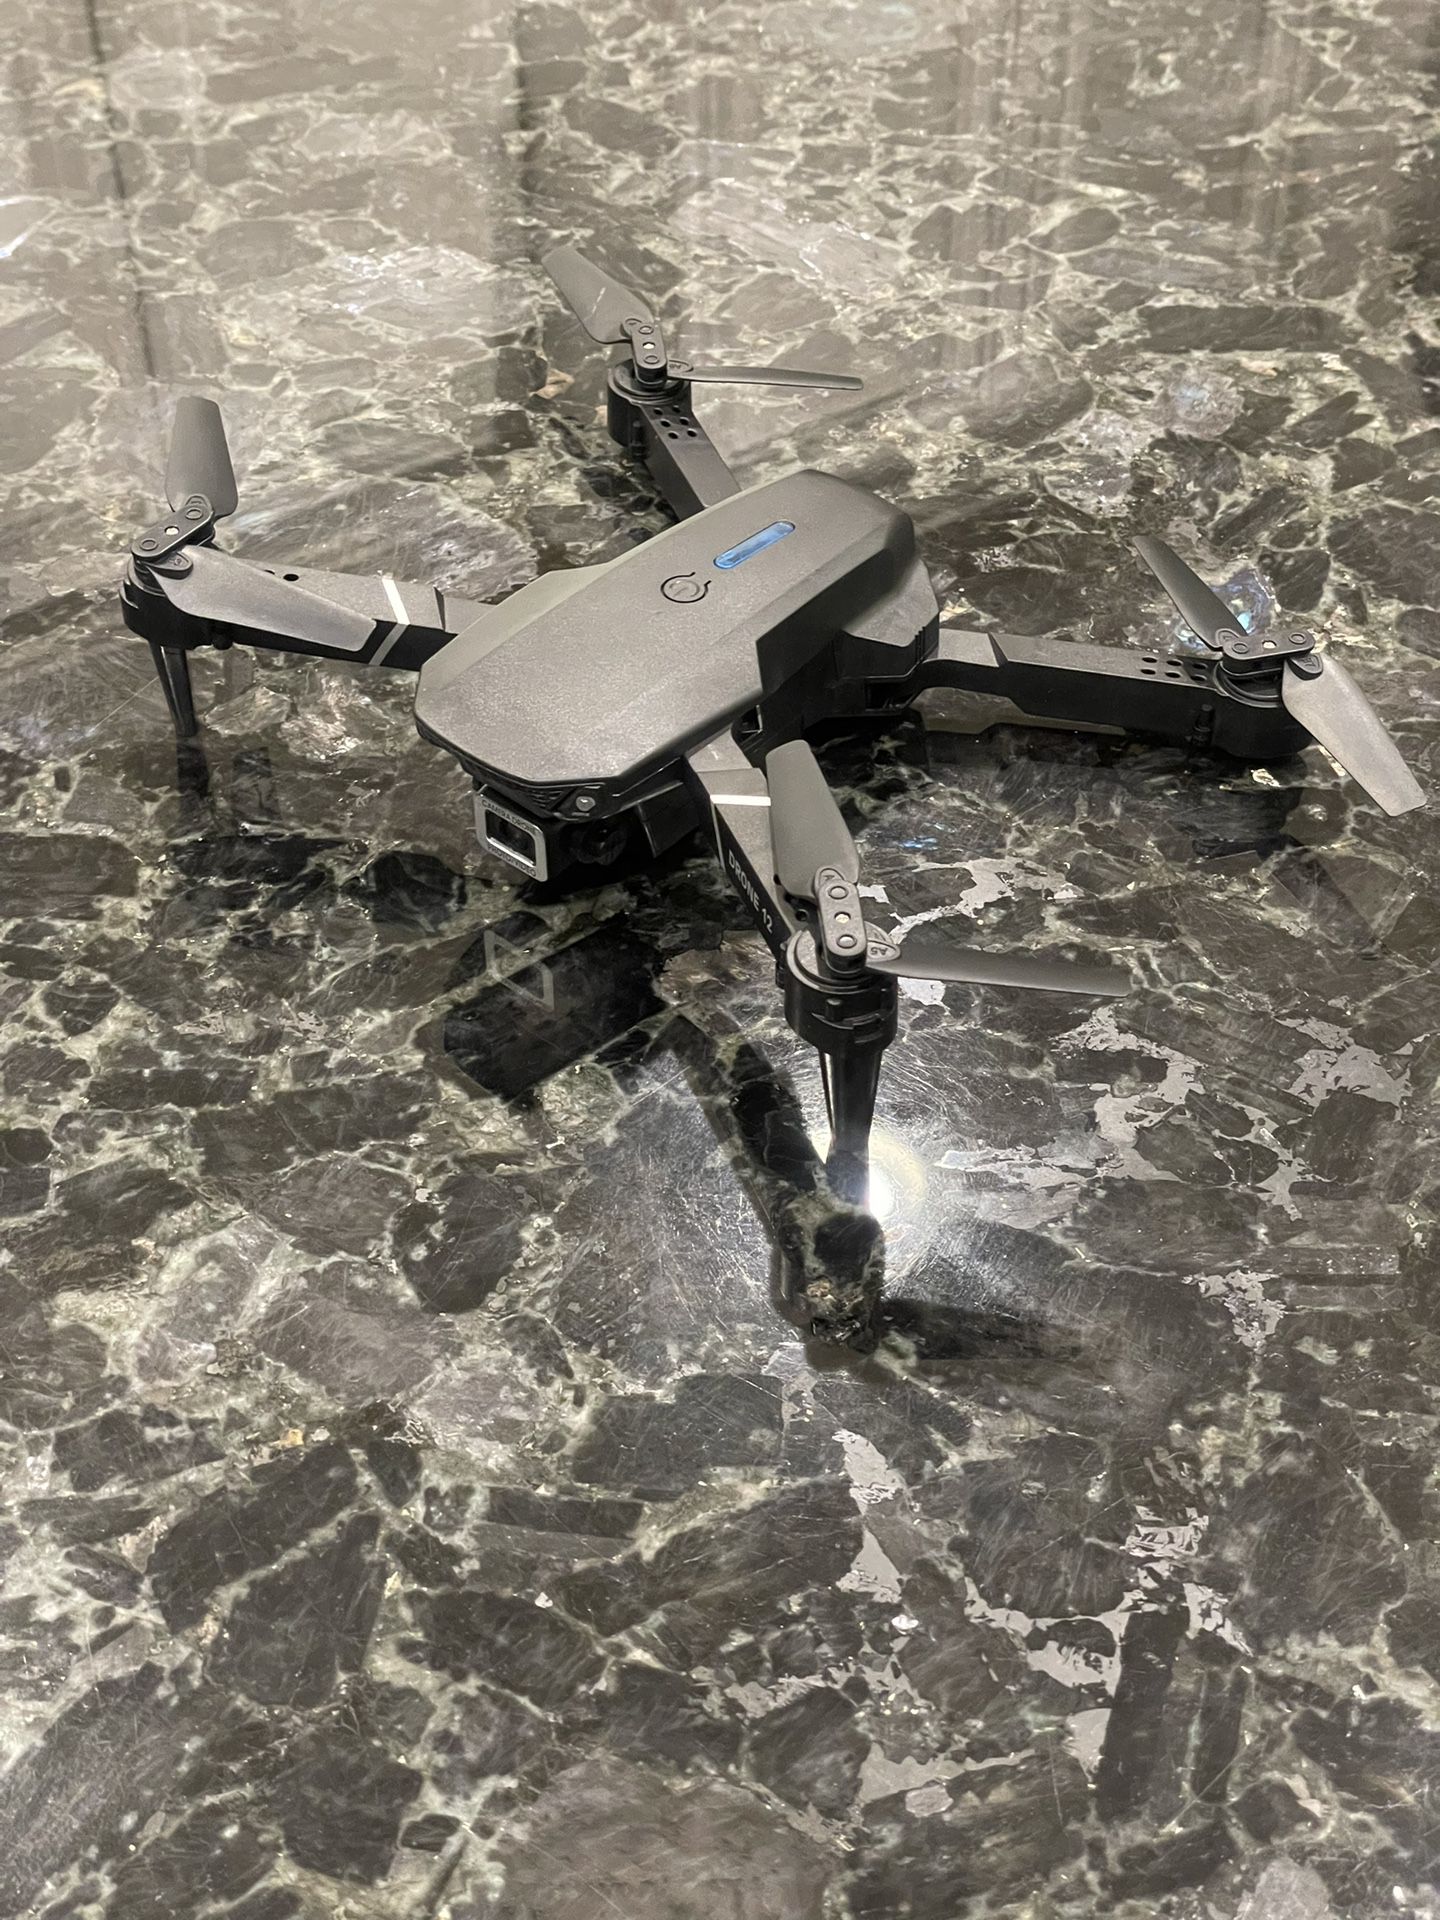 Drone With HD Camera 